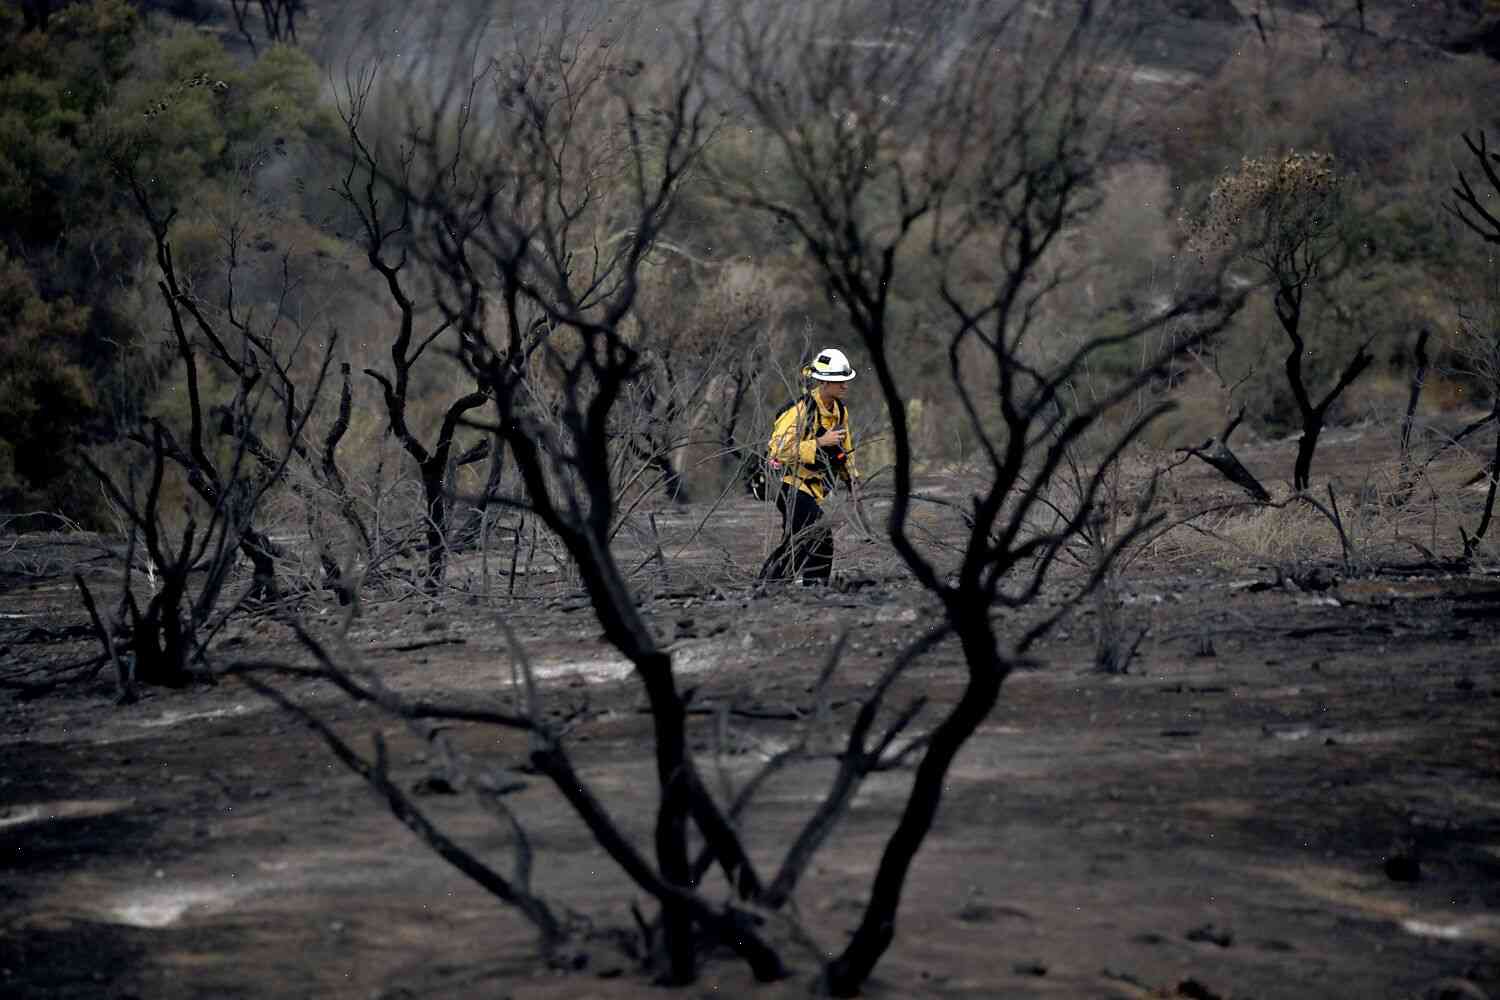 California is facing multiple impacts from climate change and extreme weather, the state’s environmental watchdog says